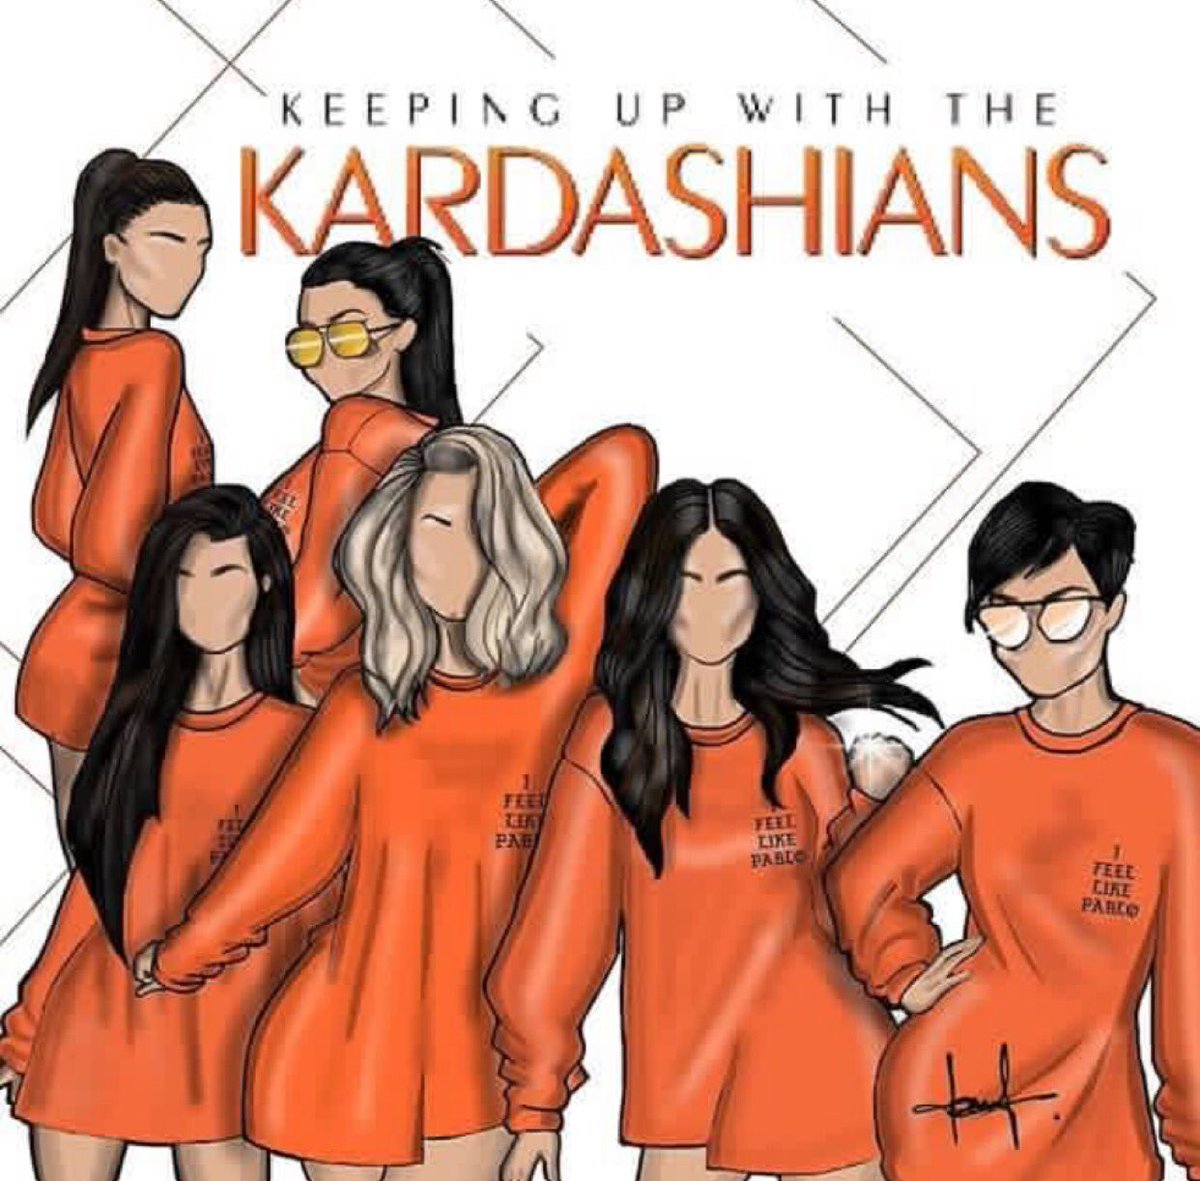 A new episode of Keeping Up With The Kardashians starts now! Tune into E! Let's live tweet! https://t.co/6KQFdguwQd